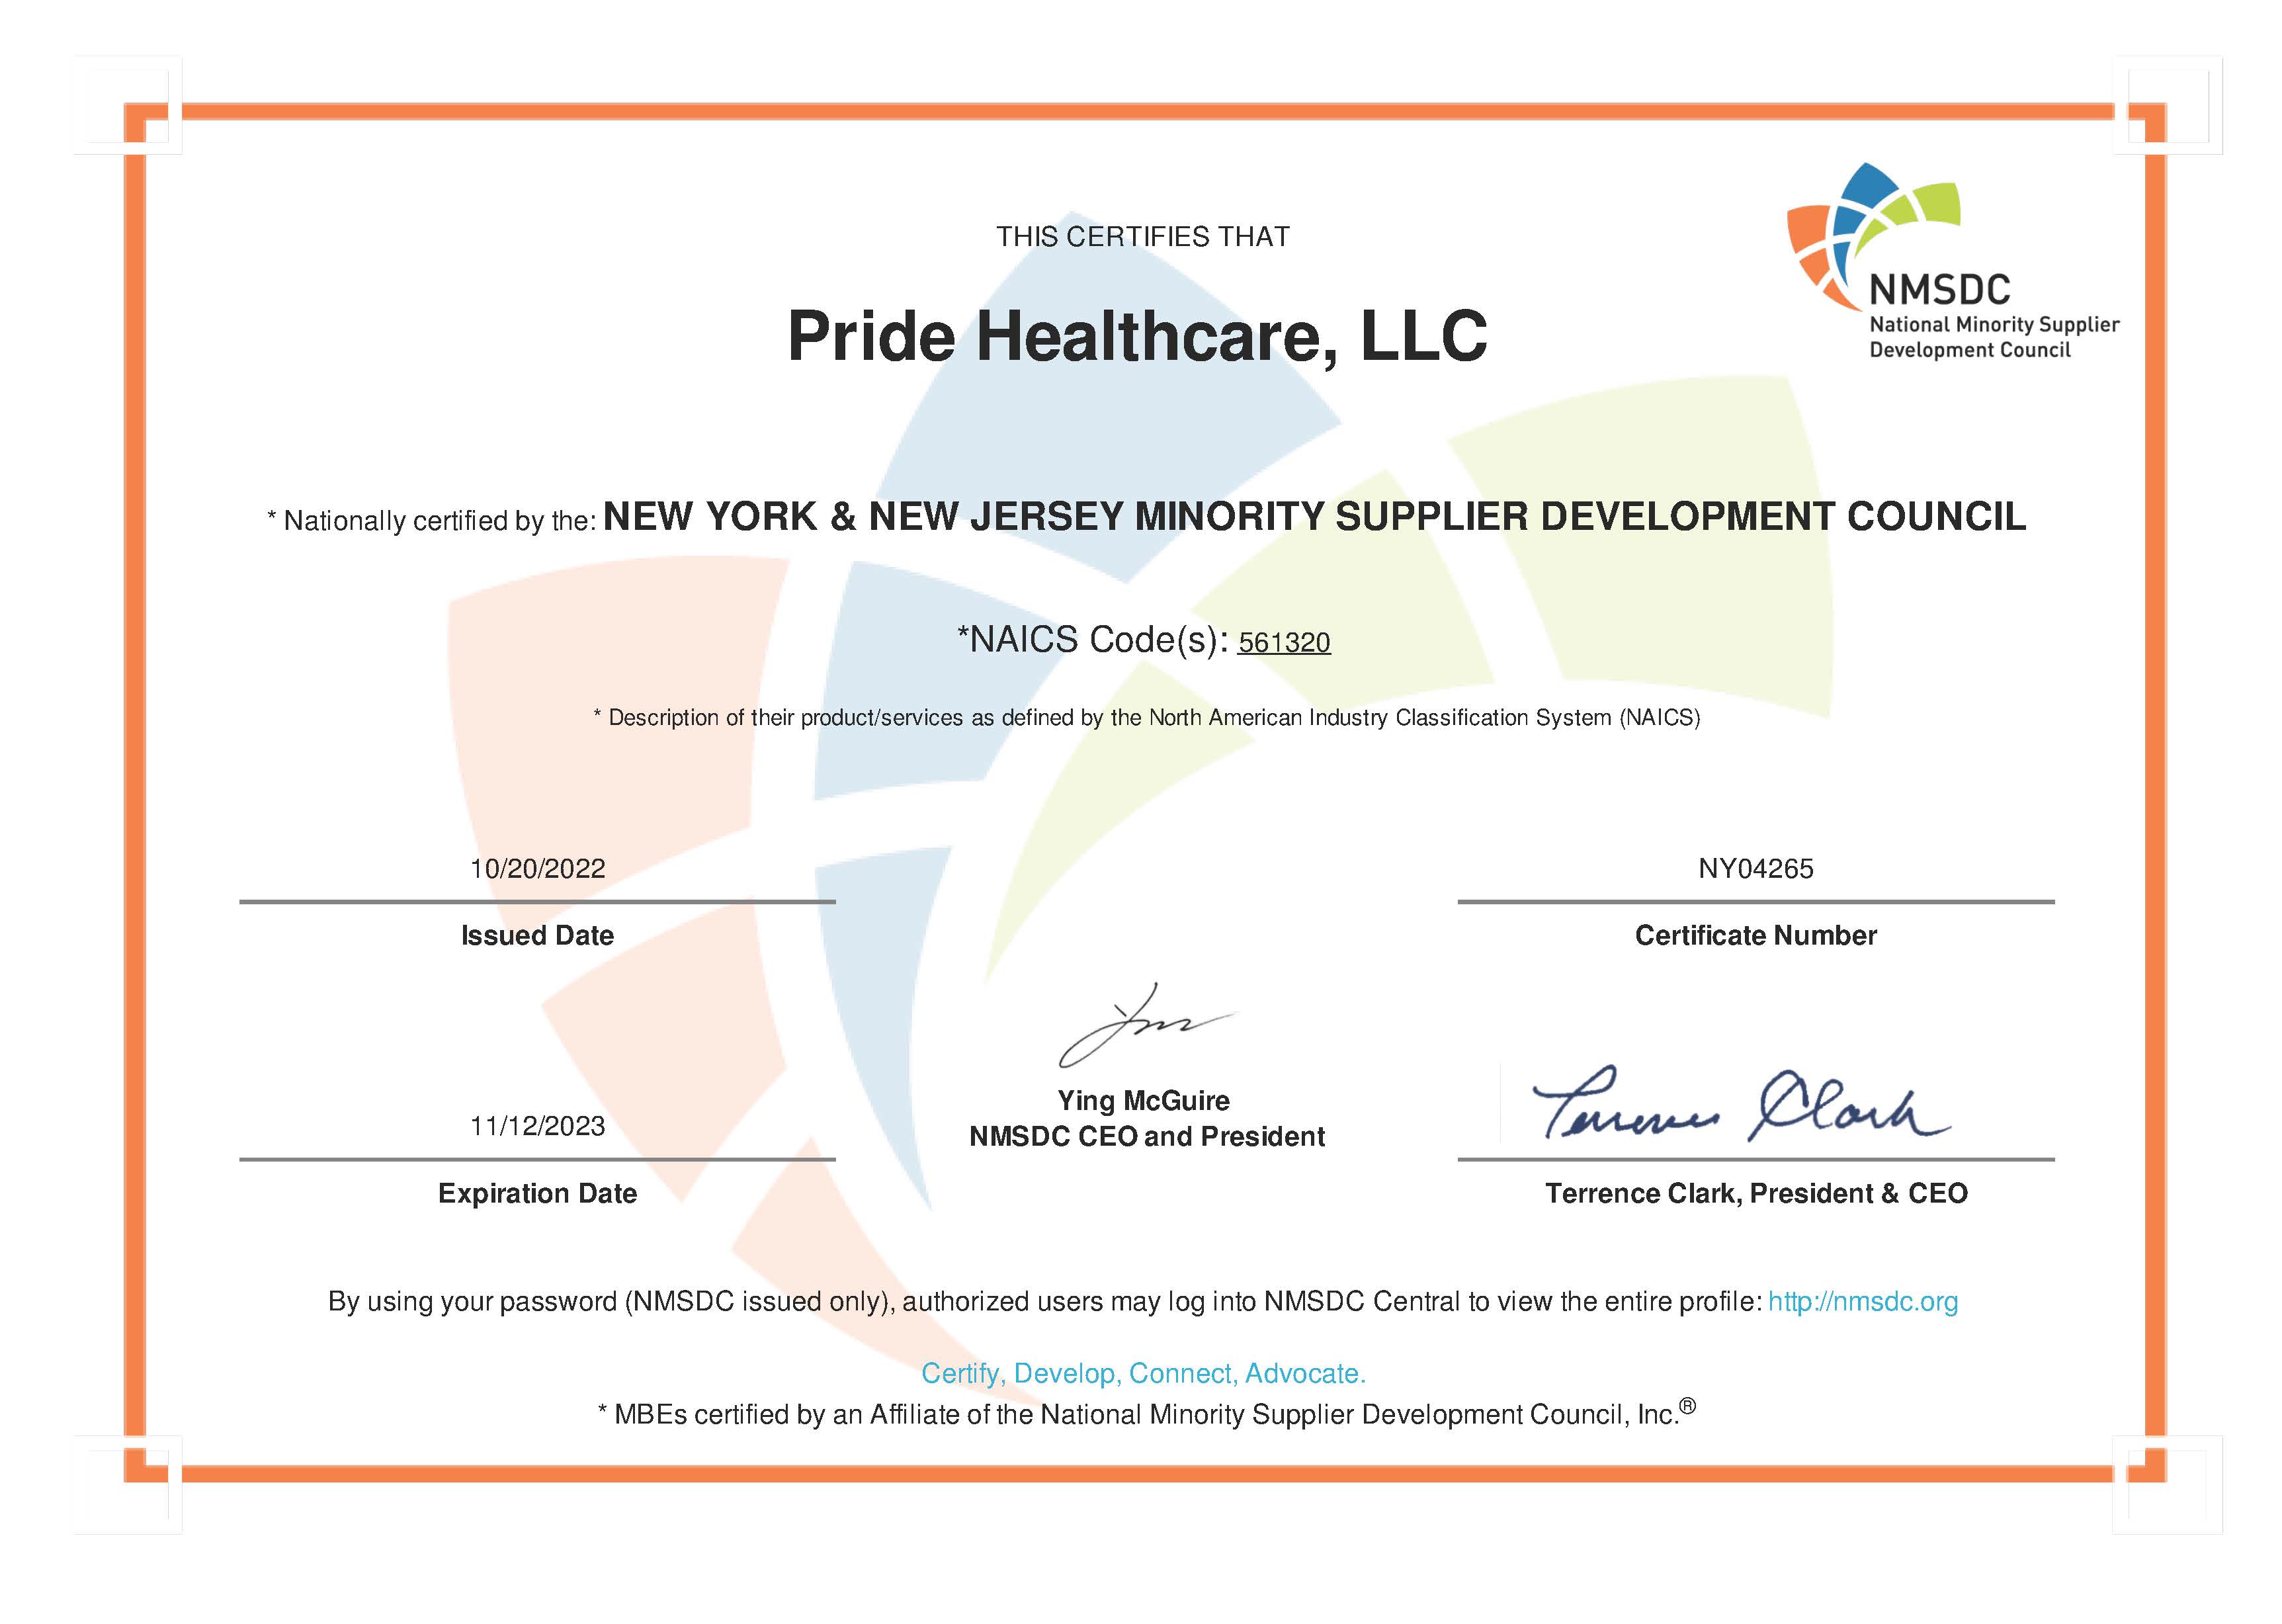 Certification of Healthcare